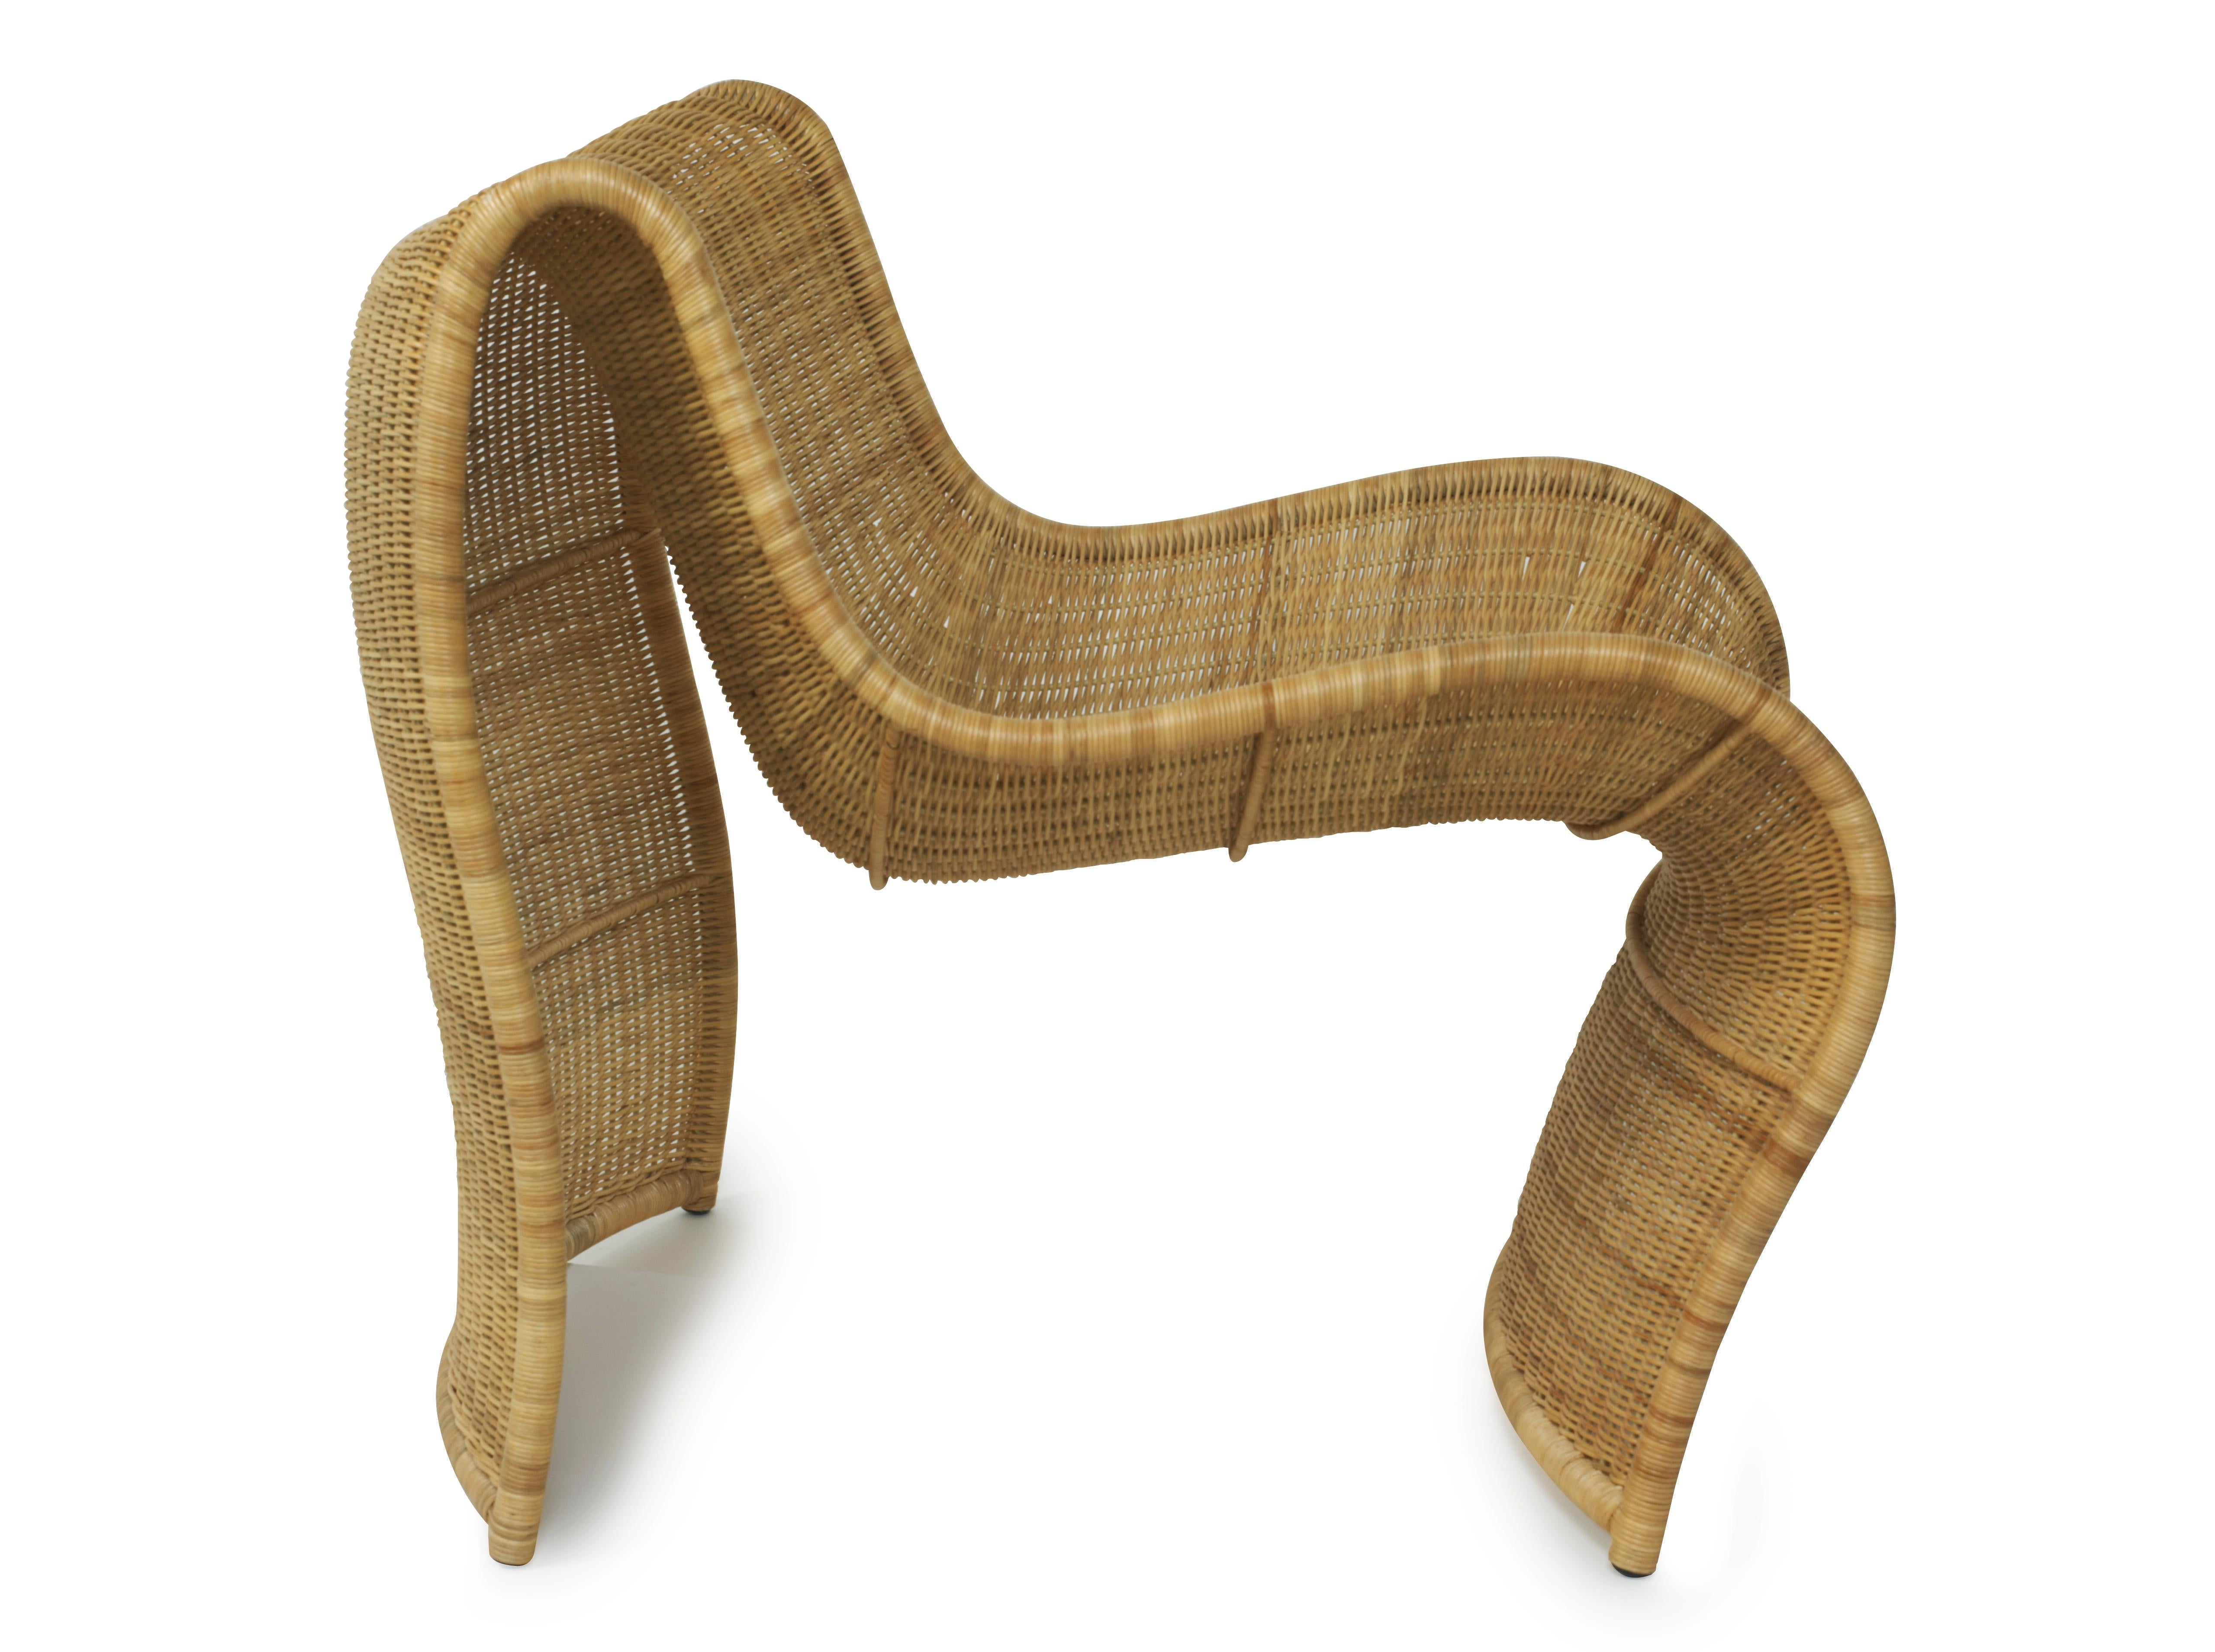 The new Lola chair is a remarkable testament to the beauty of natural materials and expert craftsmanship. Skilled artisans in the Philippines meticulously weave the chair from wicker, which has been presented in a modern and innovative way that is